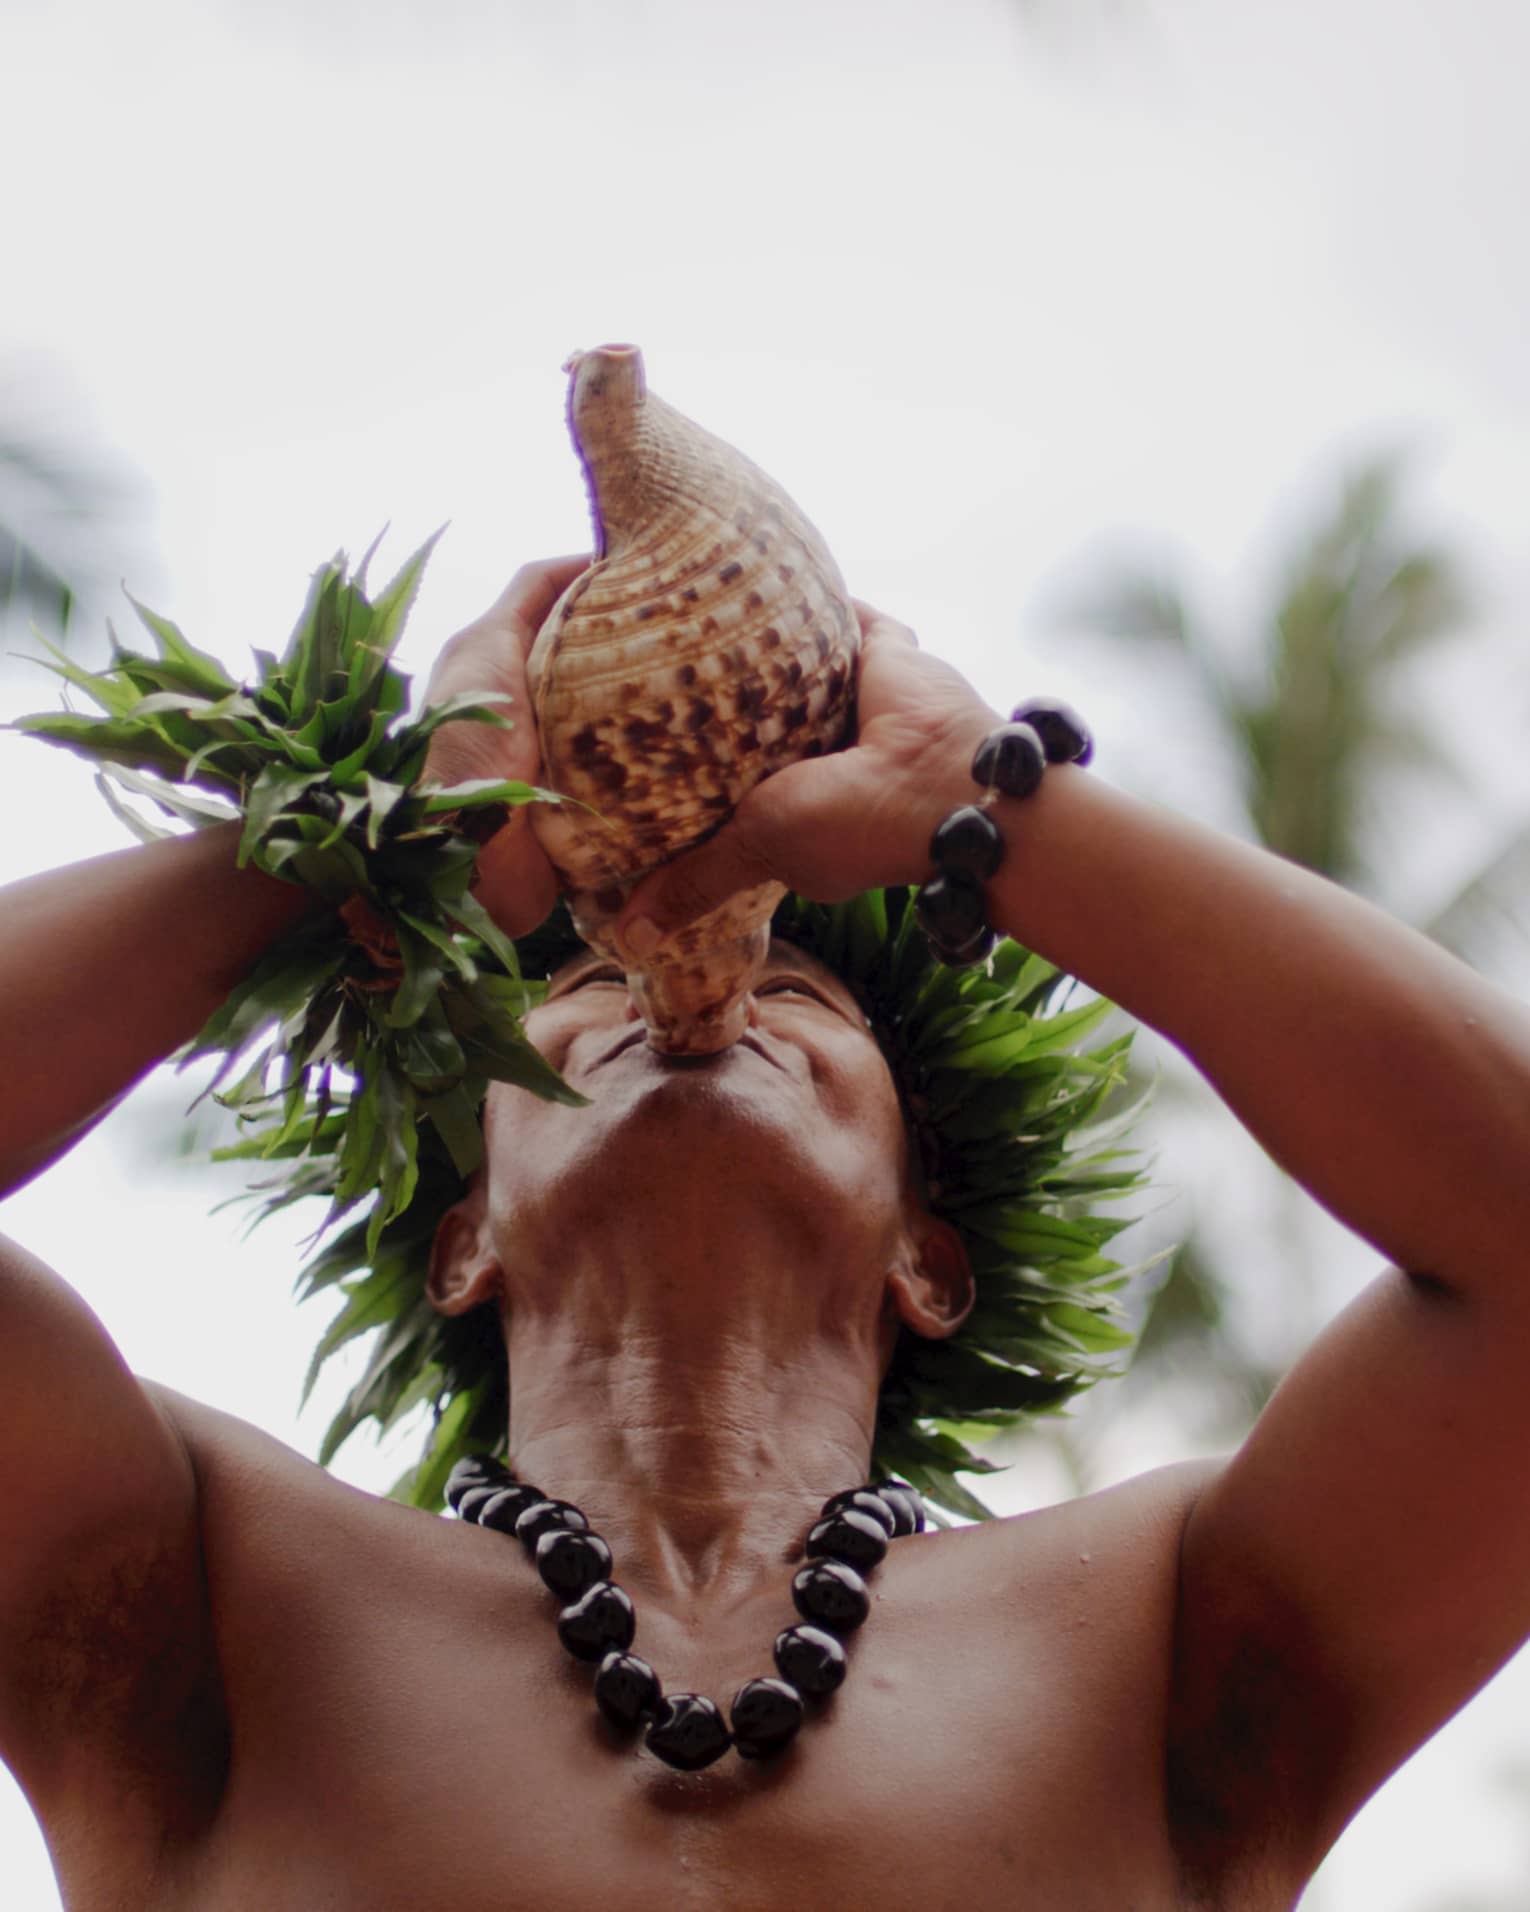 Hawaiian man wearing traditional necklace and headpiece blows in a conch shell